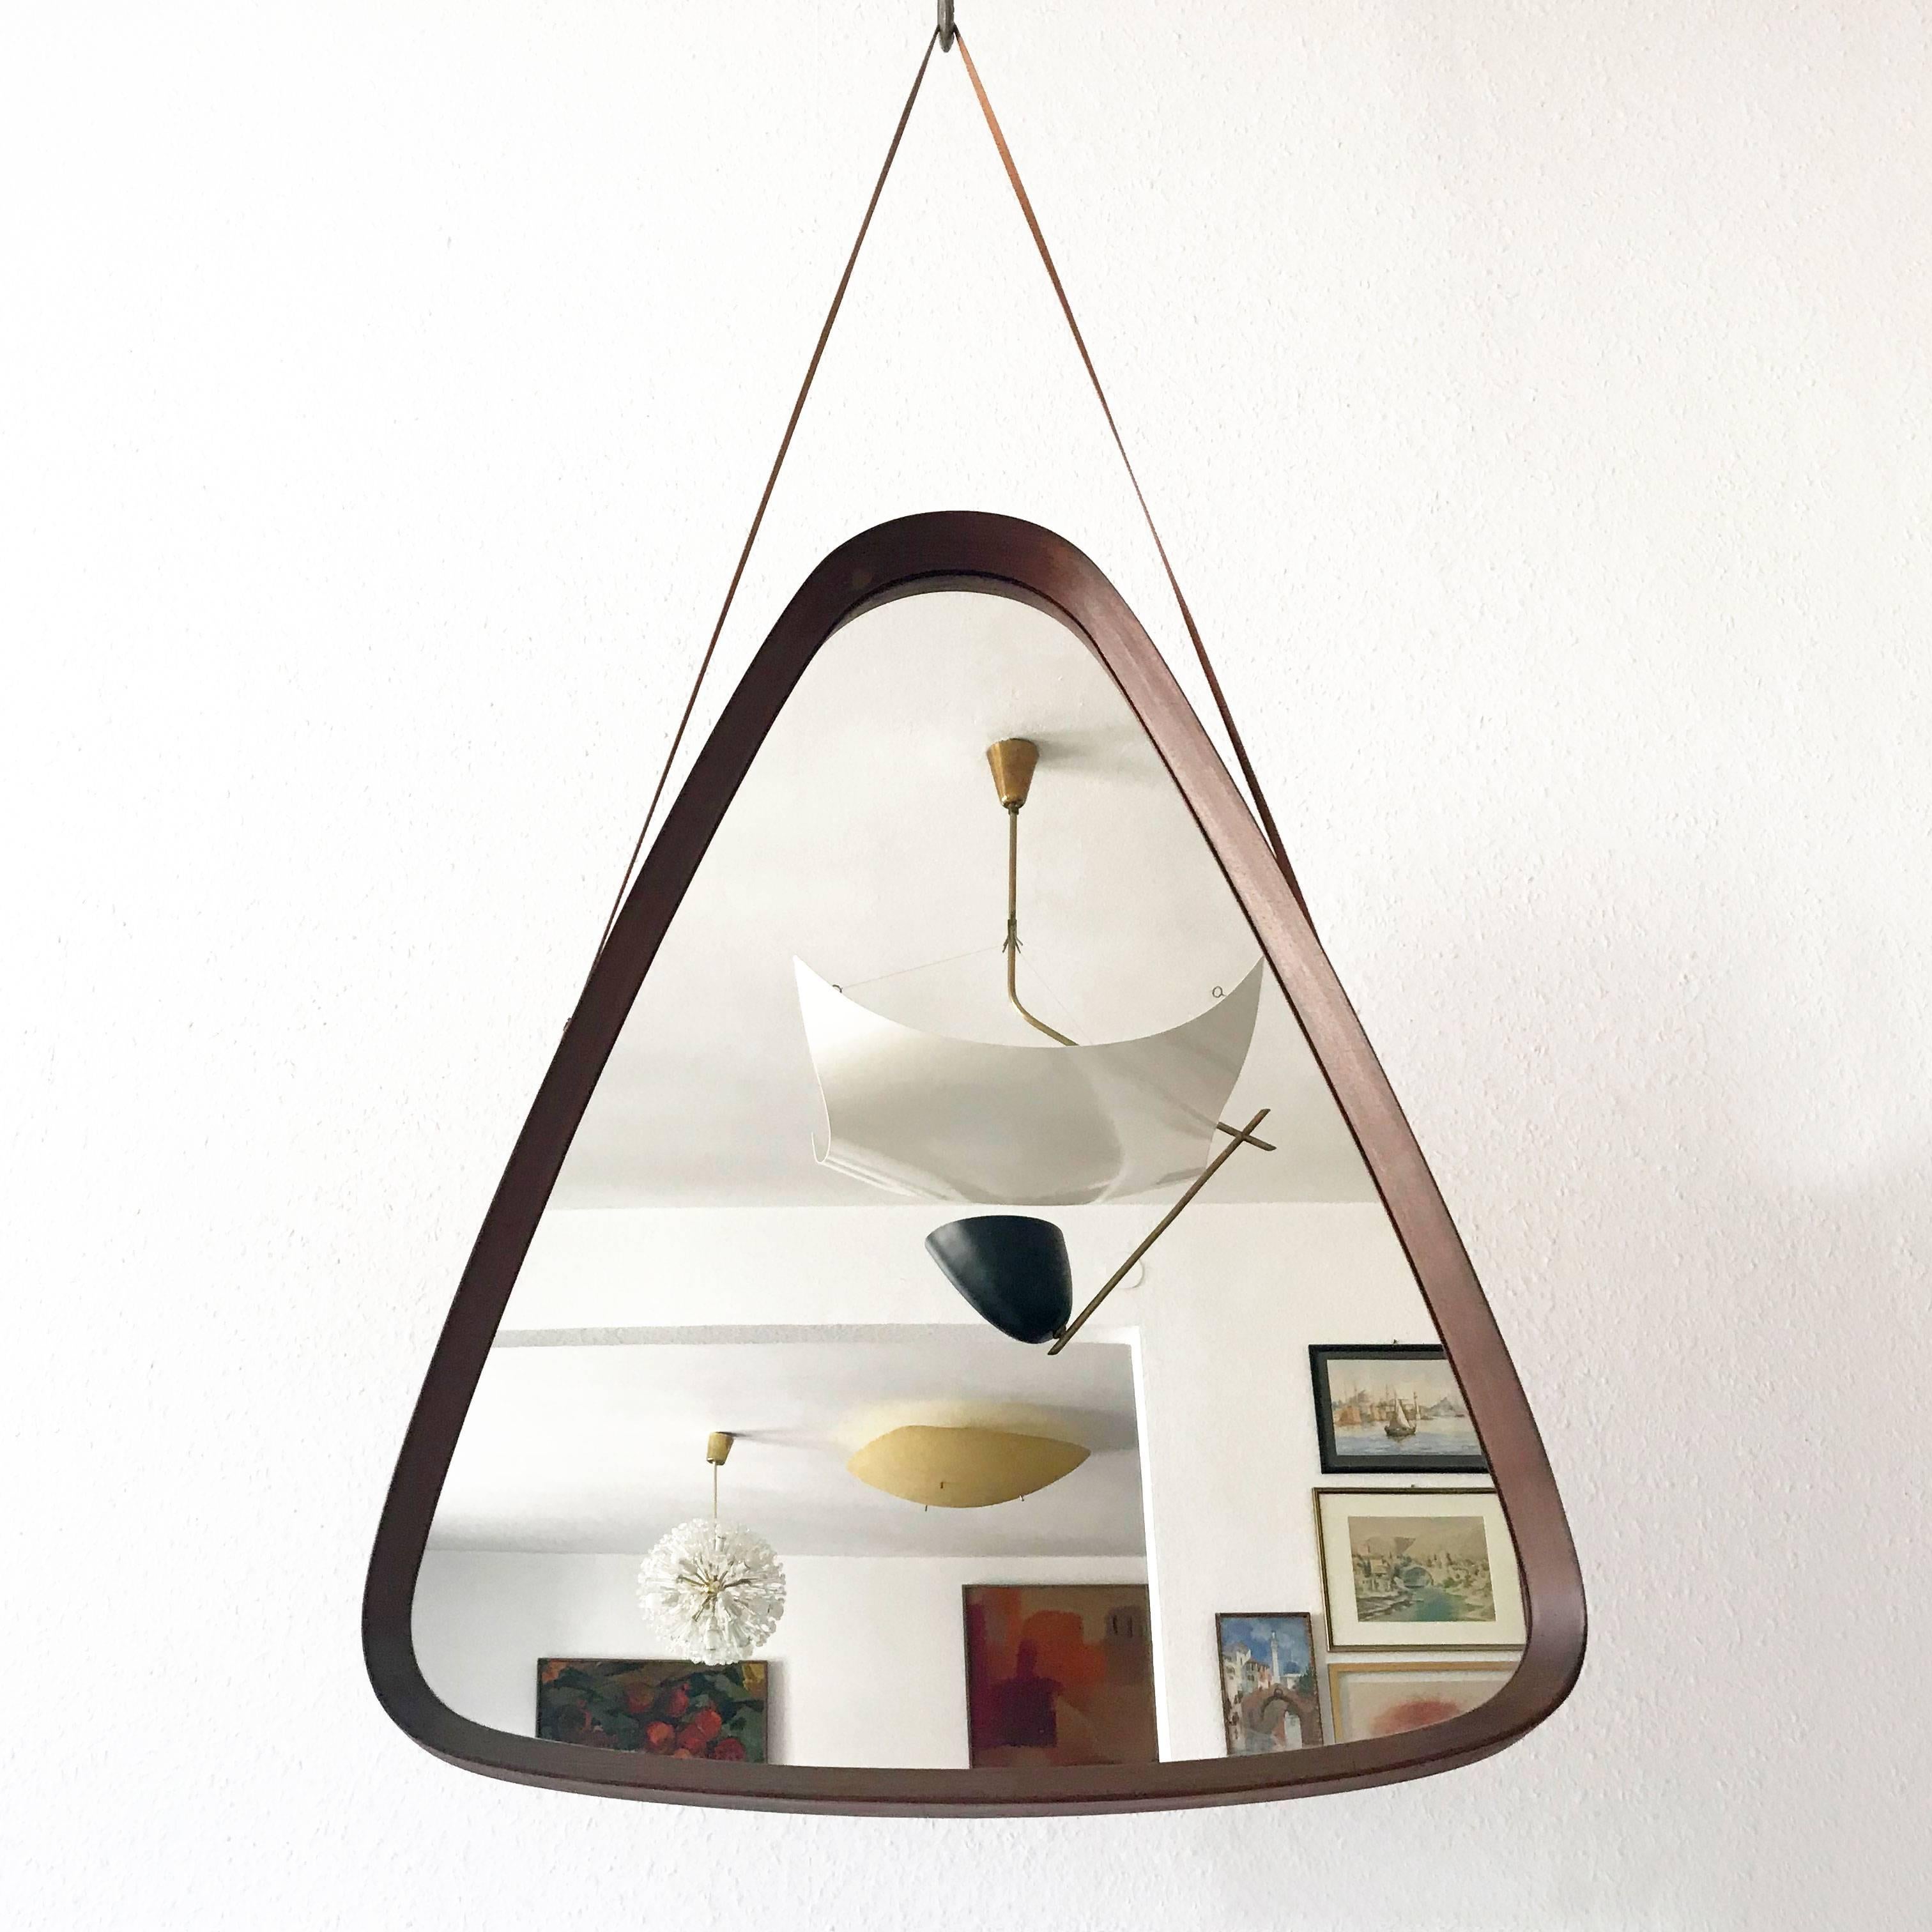 Decorative and extremely rare wall mirror in a rare triangle shape. With teak frame and fine details. Designed and manufactured probably in Denmark, 1960s.